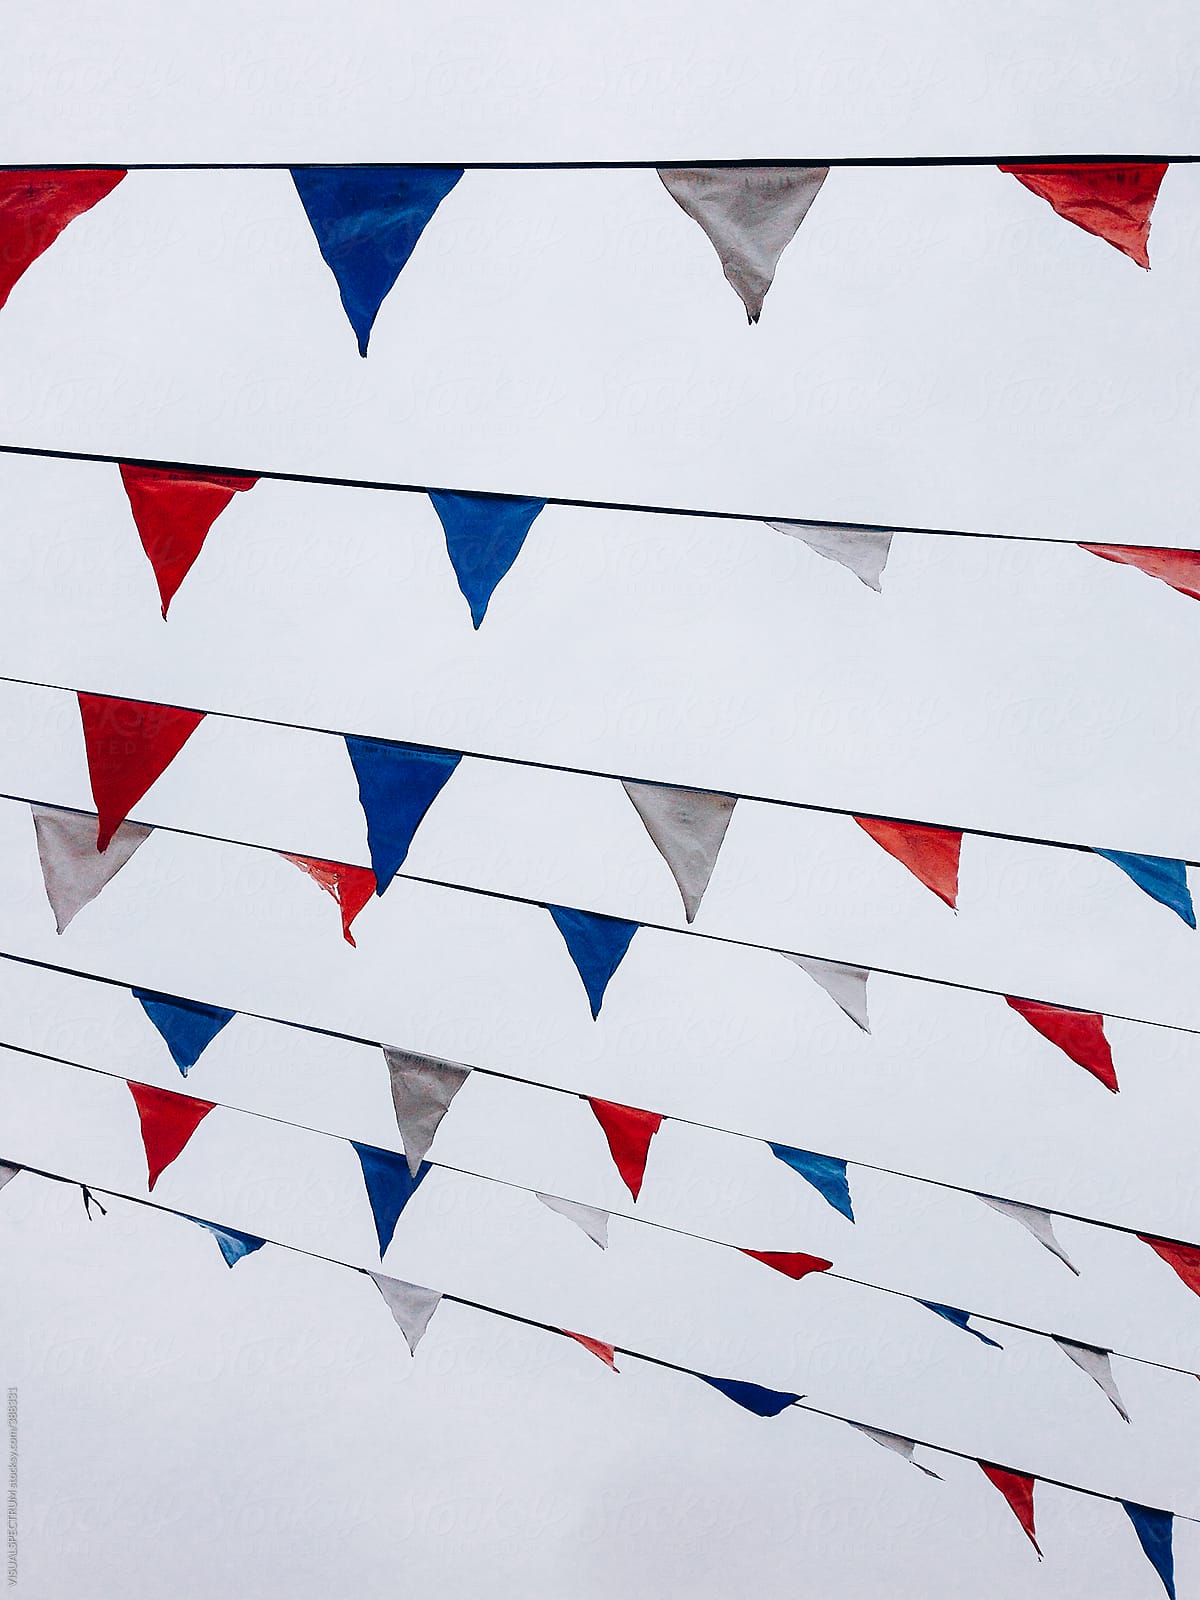 Many Small Triangular Flags in American Colors Hanging on Line